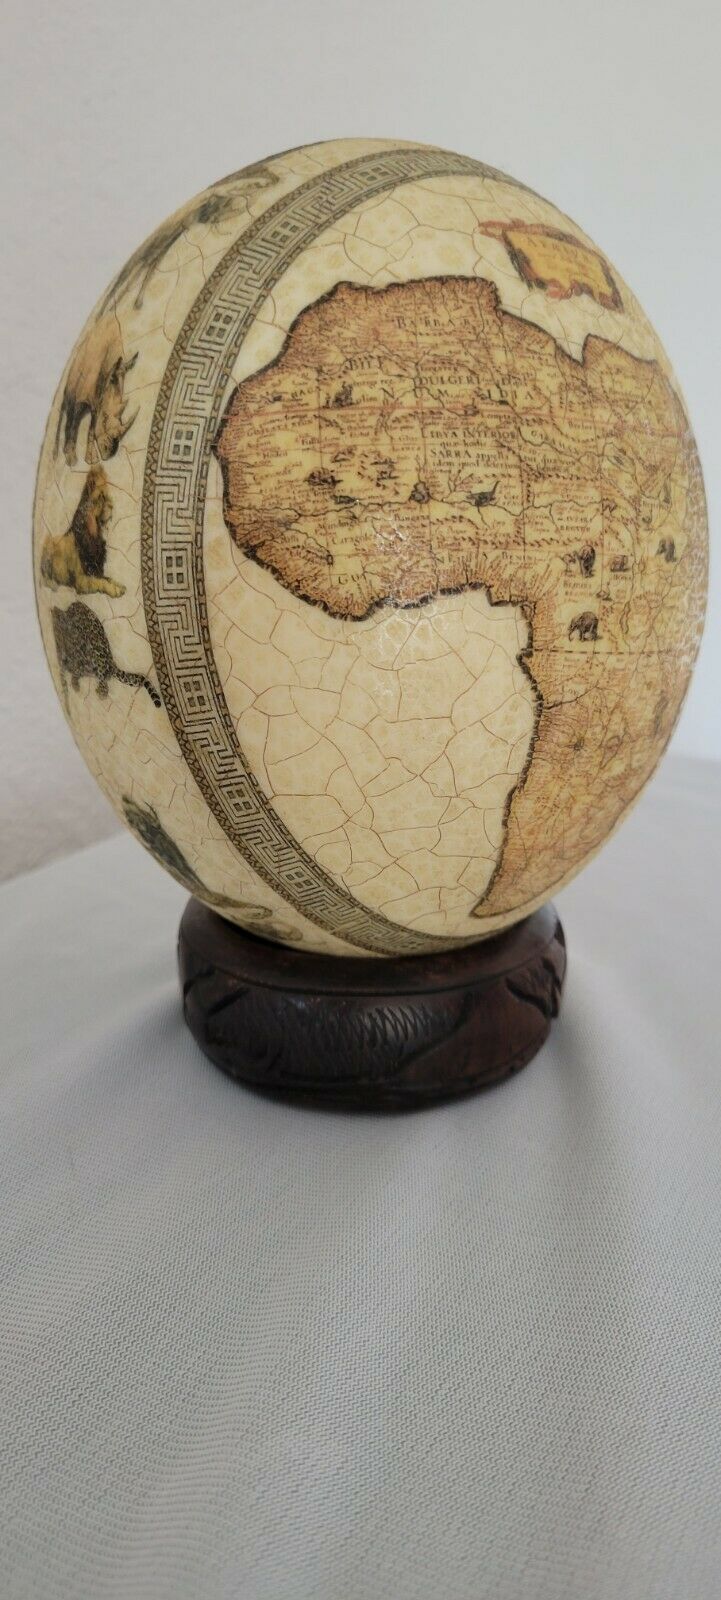 Decorated Ostrich Egg With Map Of Africa And African Animals 6" Tall X 5"